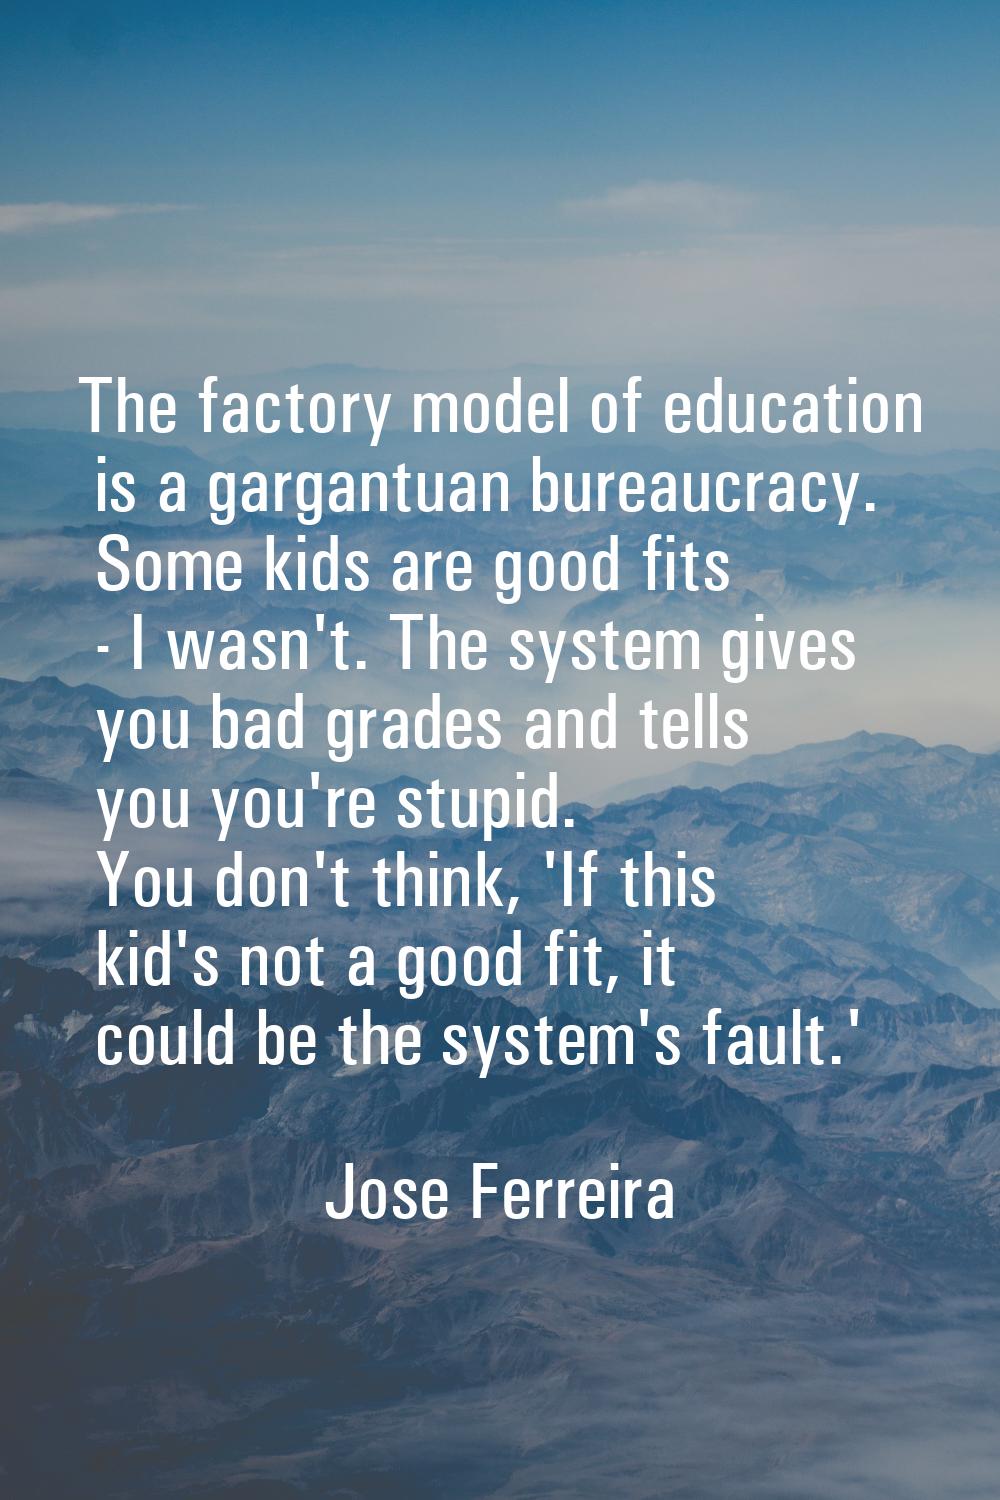 The factory model of education is a gargantuan bureaucracy. Some kids are good fits - I wasn't. The